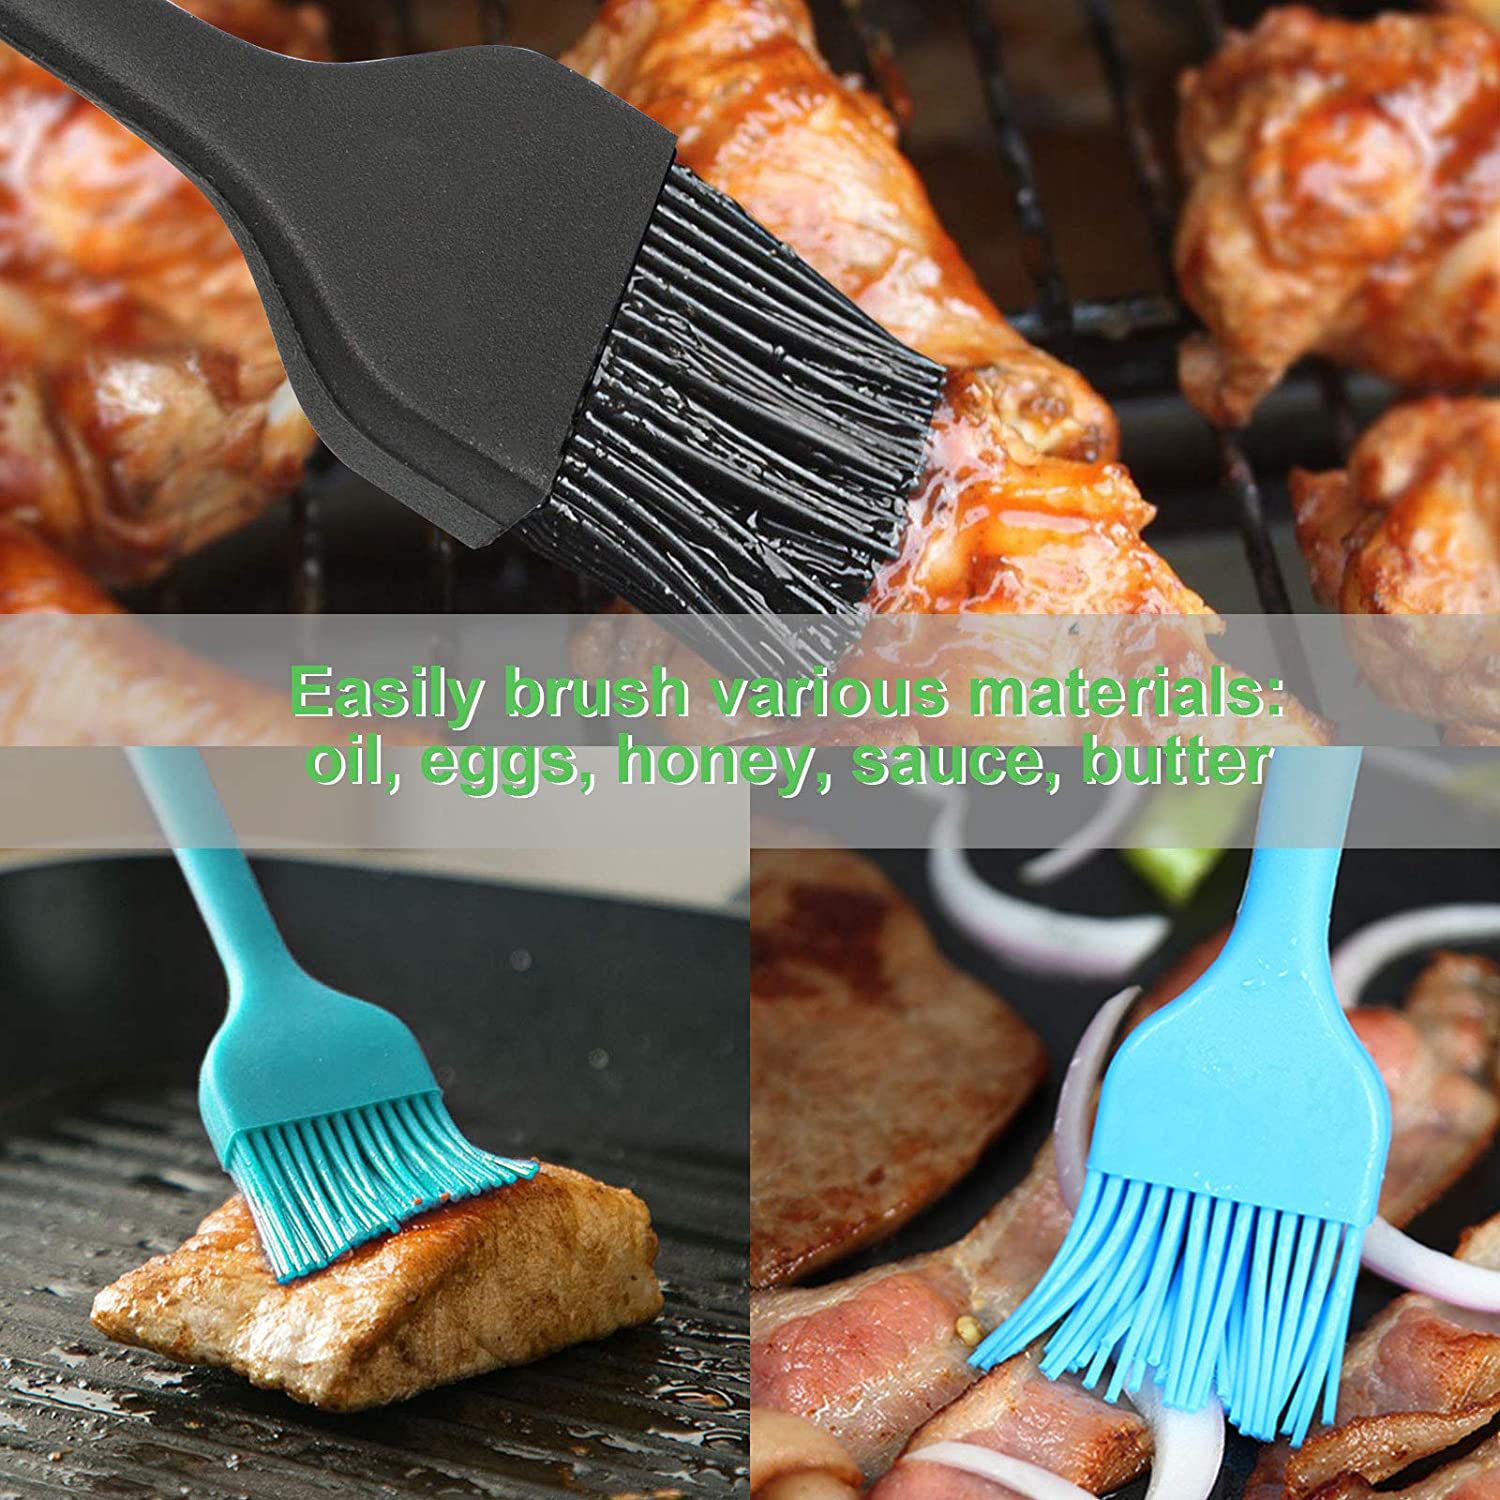 Silicone Basting Brush, Premium Baking Brush - for Cooking, Grilling & Marinating, BBQ, Pastry, Sauce, Butter, Oil, Turkey and Desserts Baking - Heat Resistant Barbecue Utensil, Set of 2